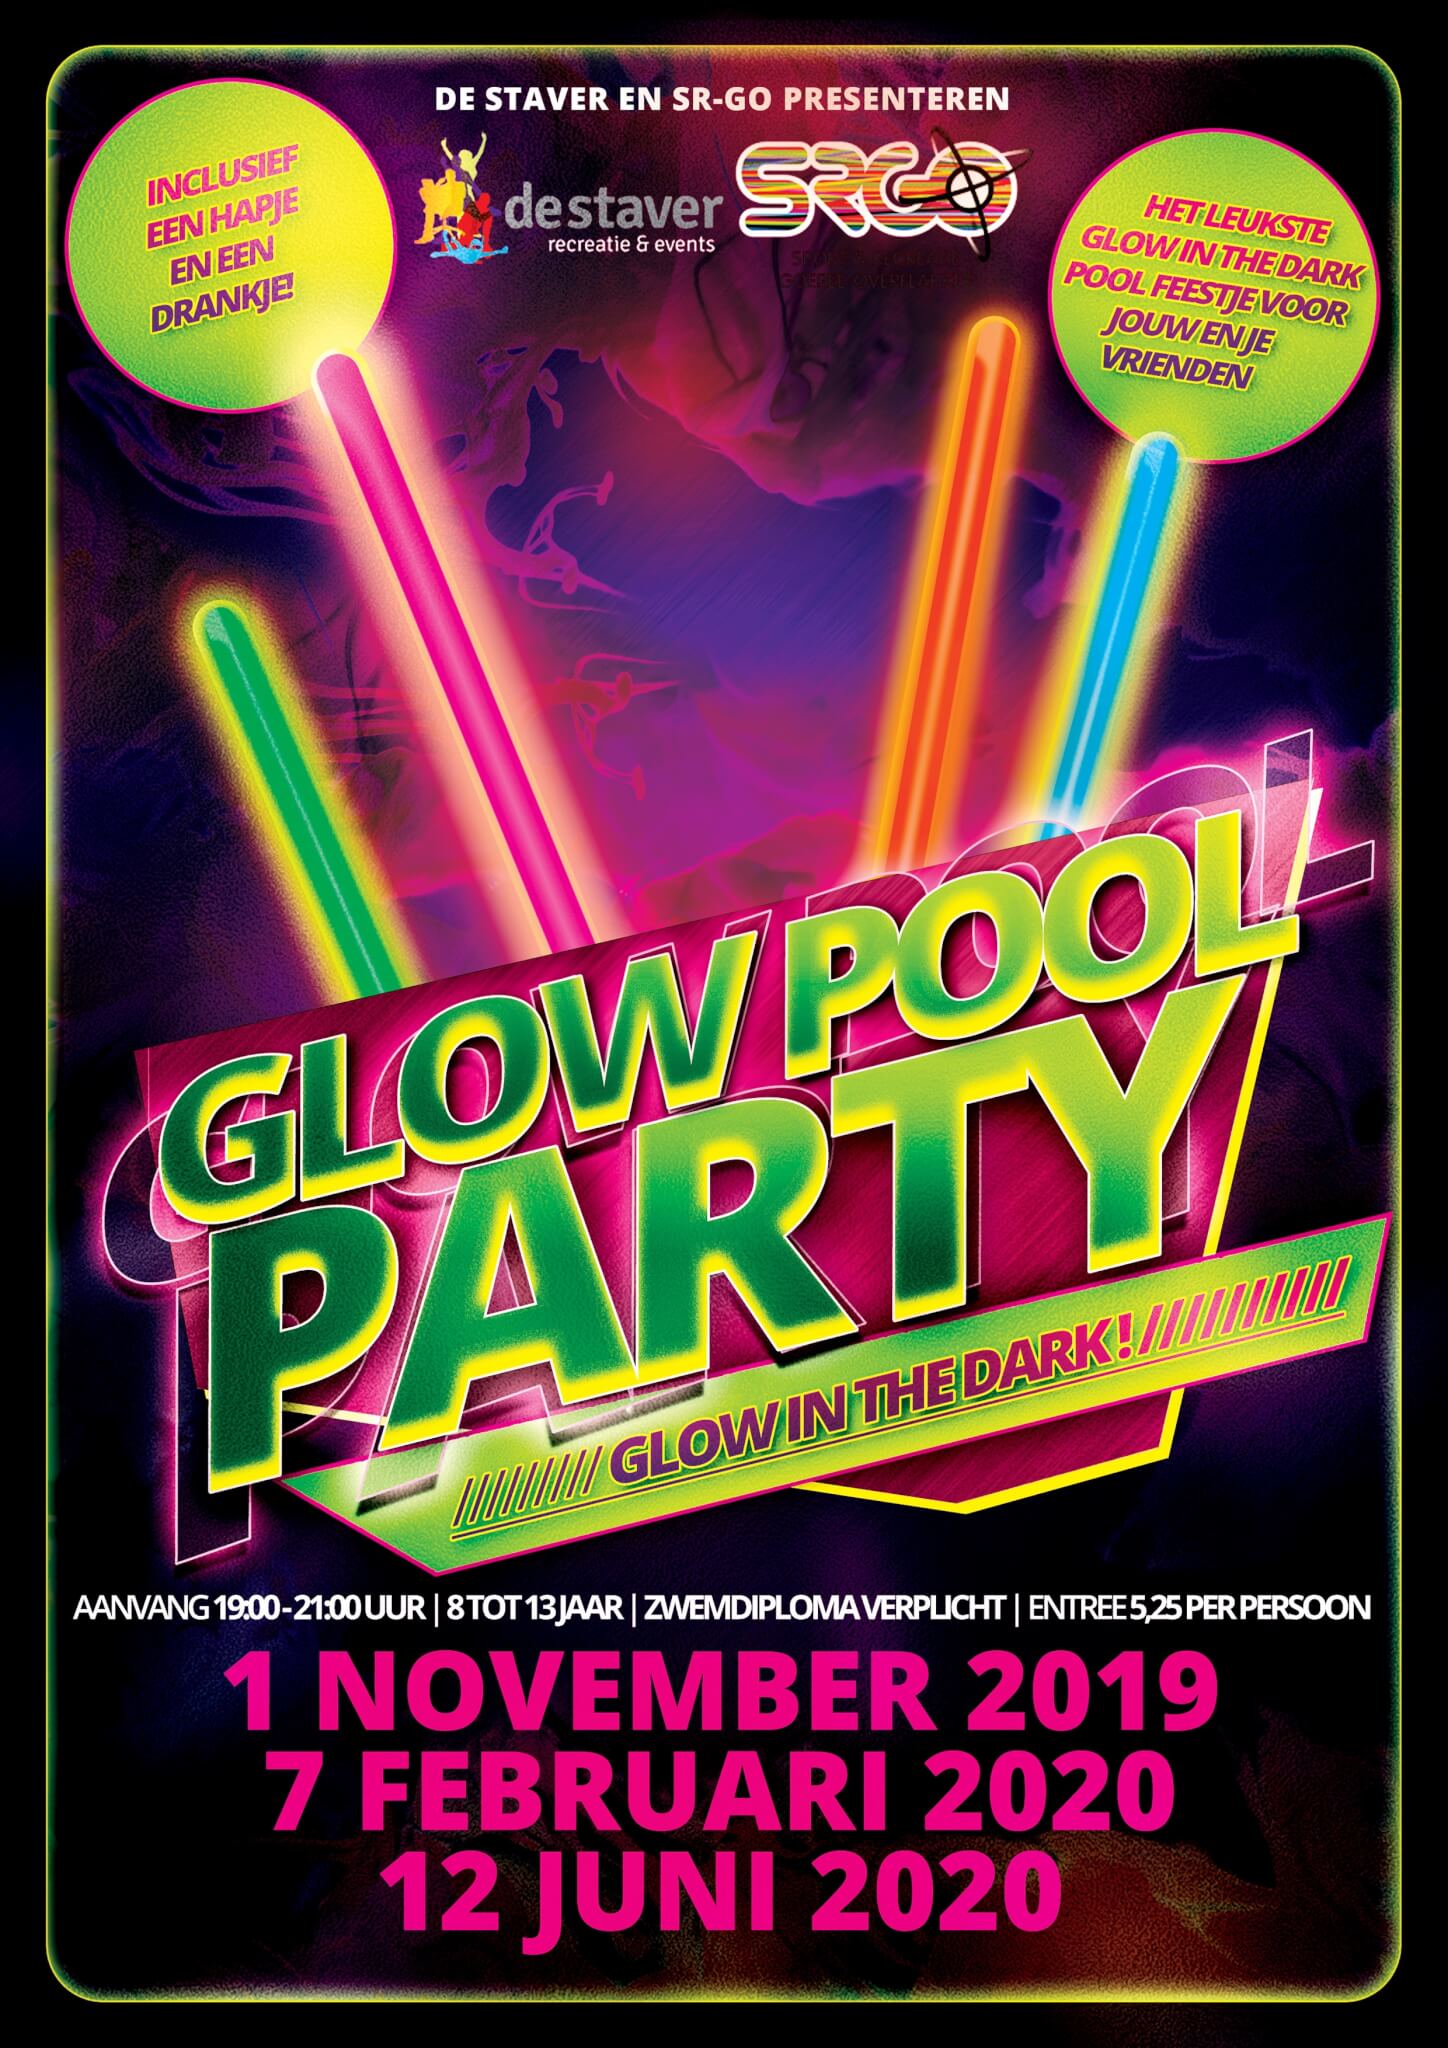 Glow in the dark Poolparty in de Staver